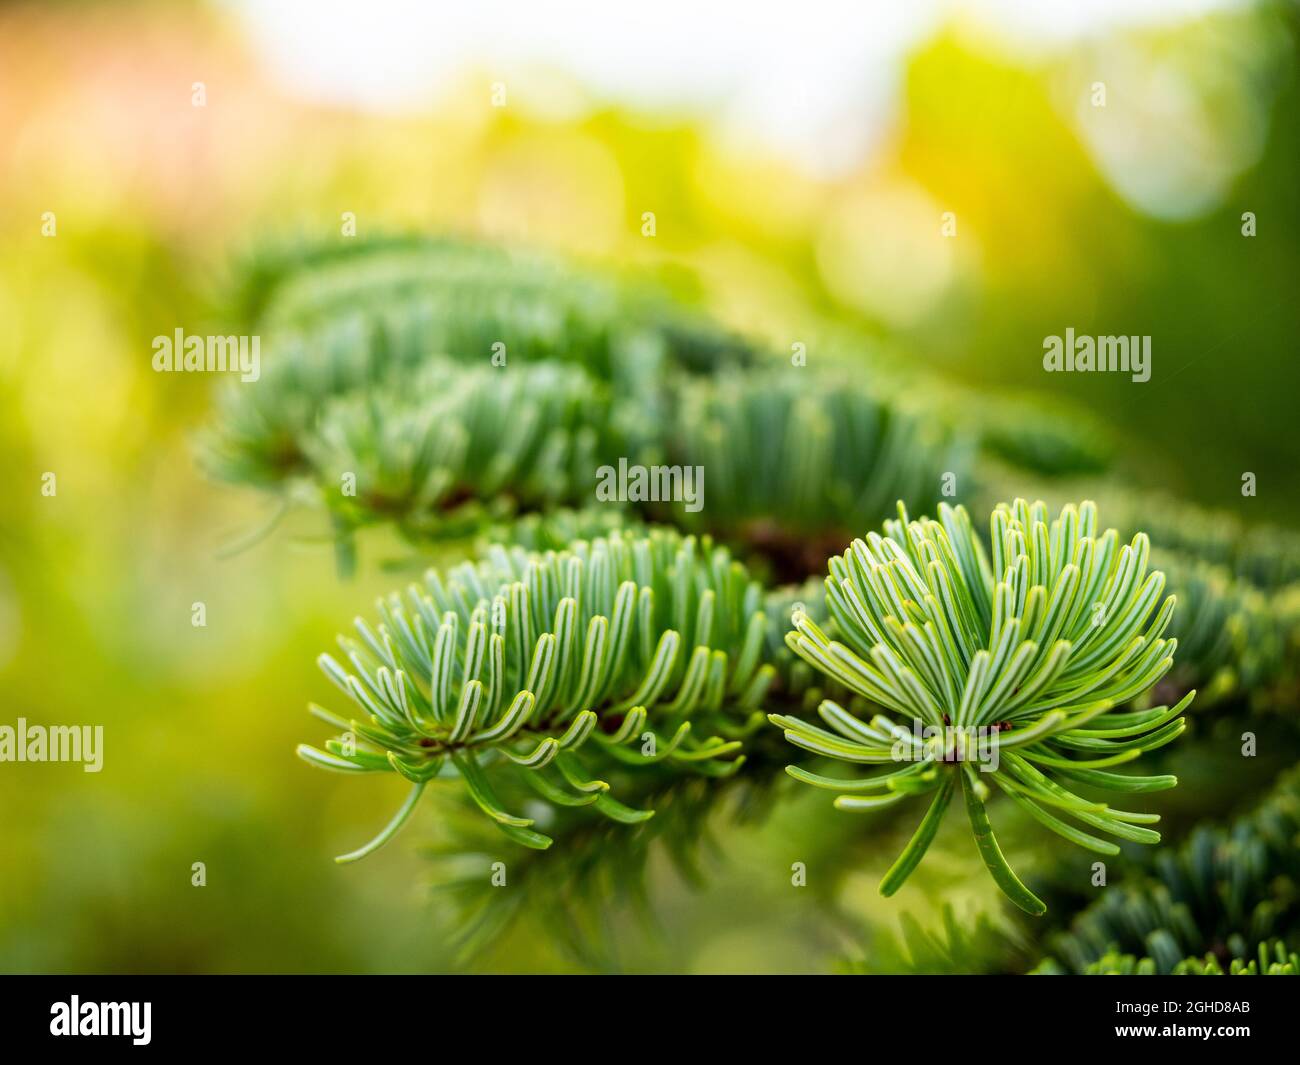 selective focus of abies alba leaves (European silver fir) with blurred background Stock Photo